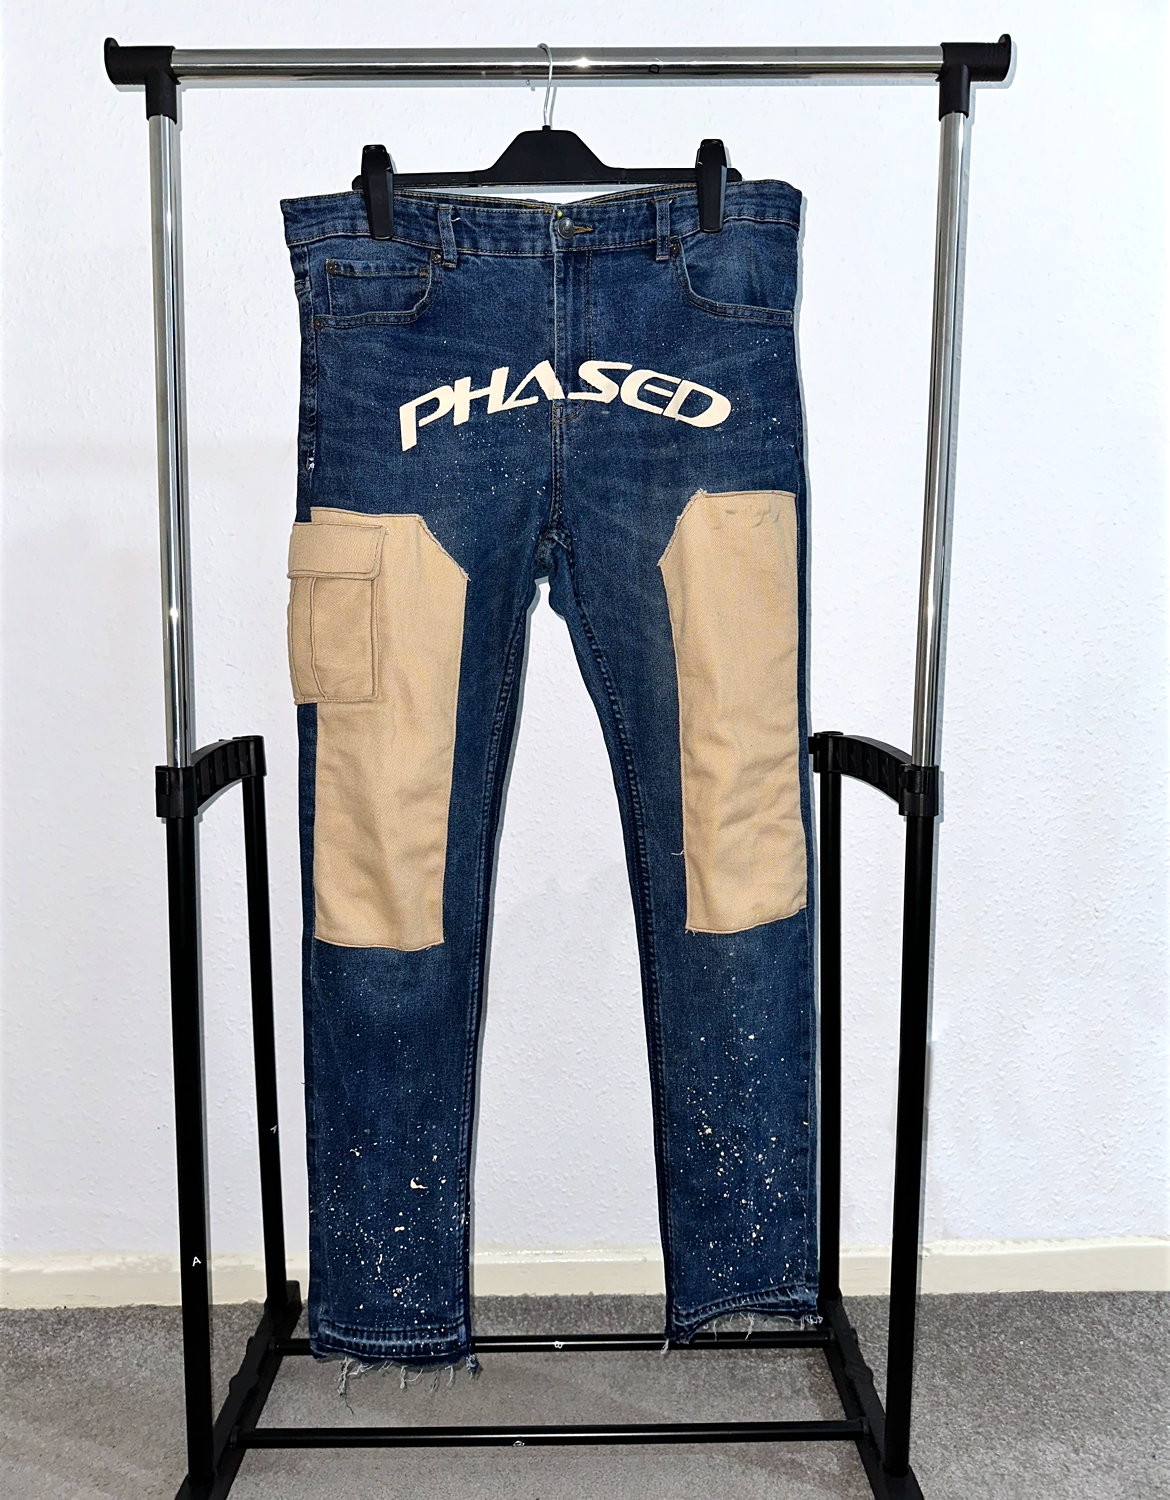 Phased Patchwork Jeans